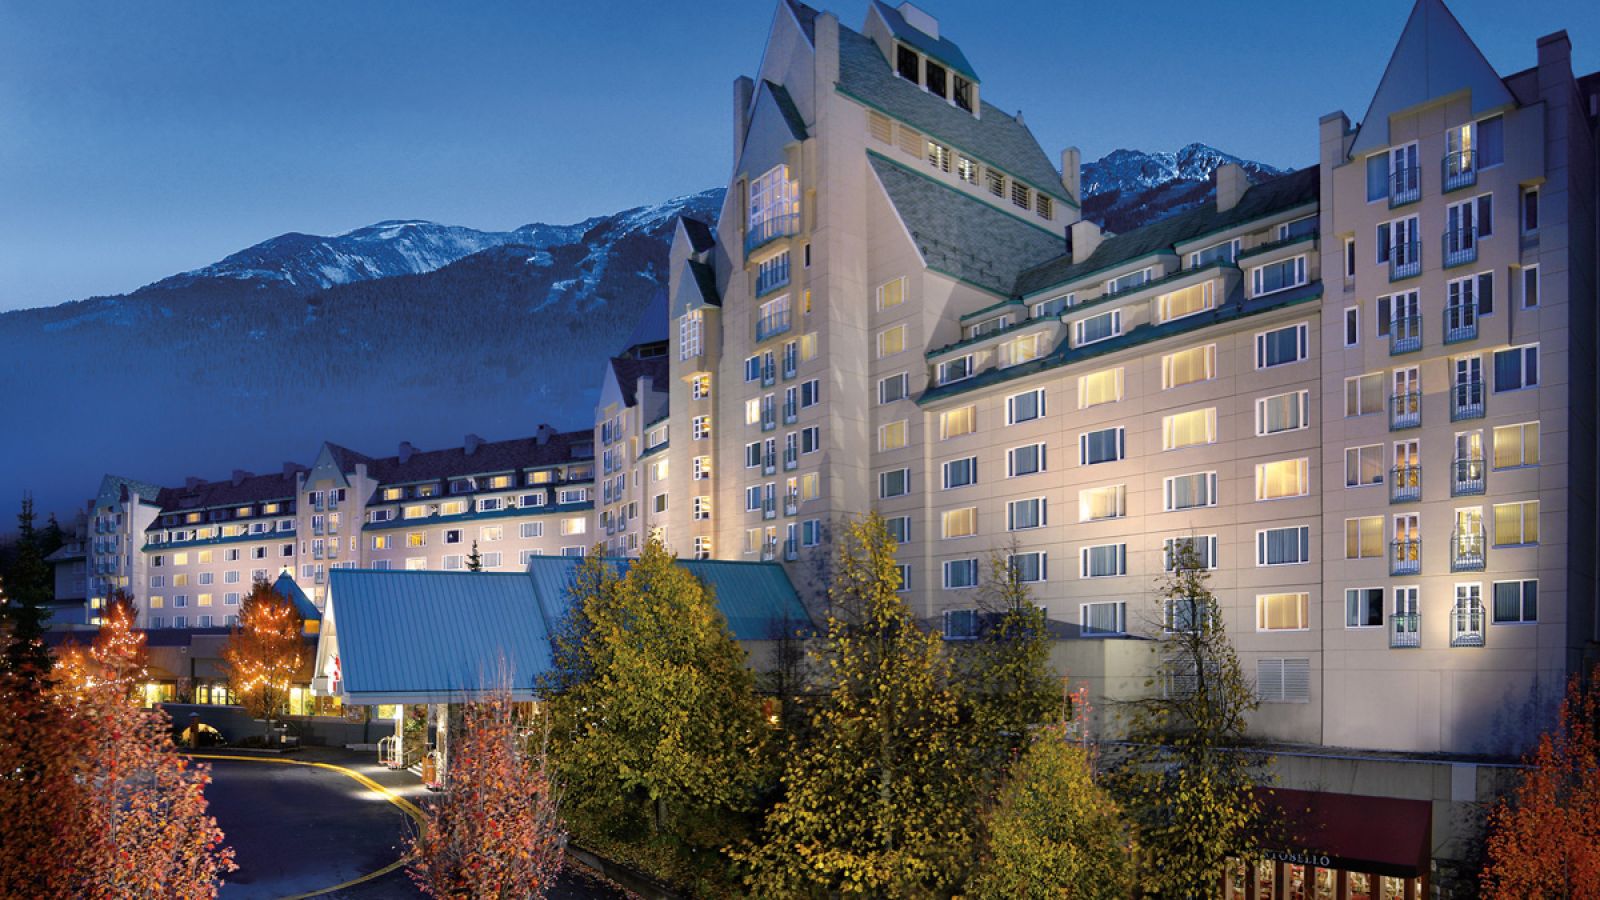 Fairmont Chateau Whistler Resort - Whistler golf packages